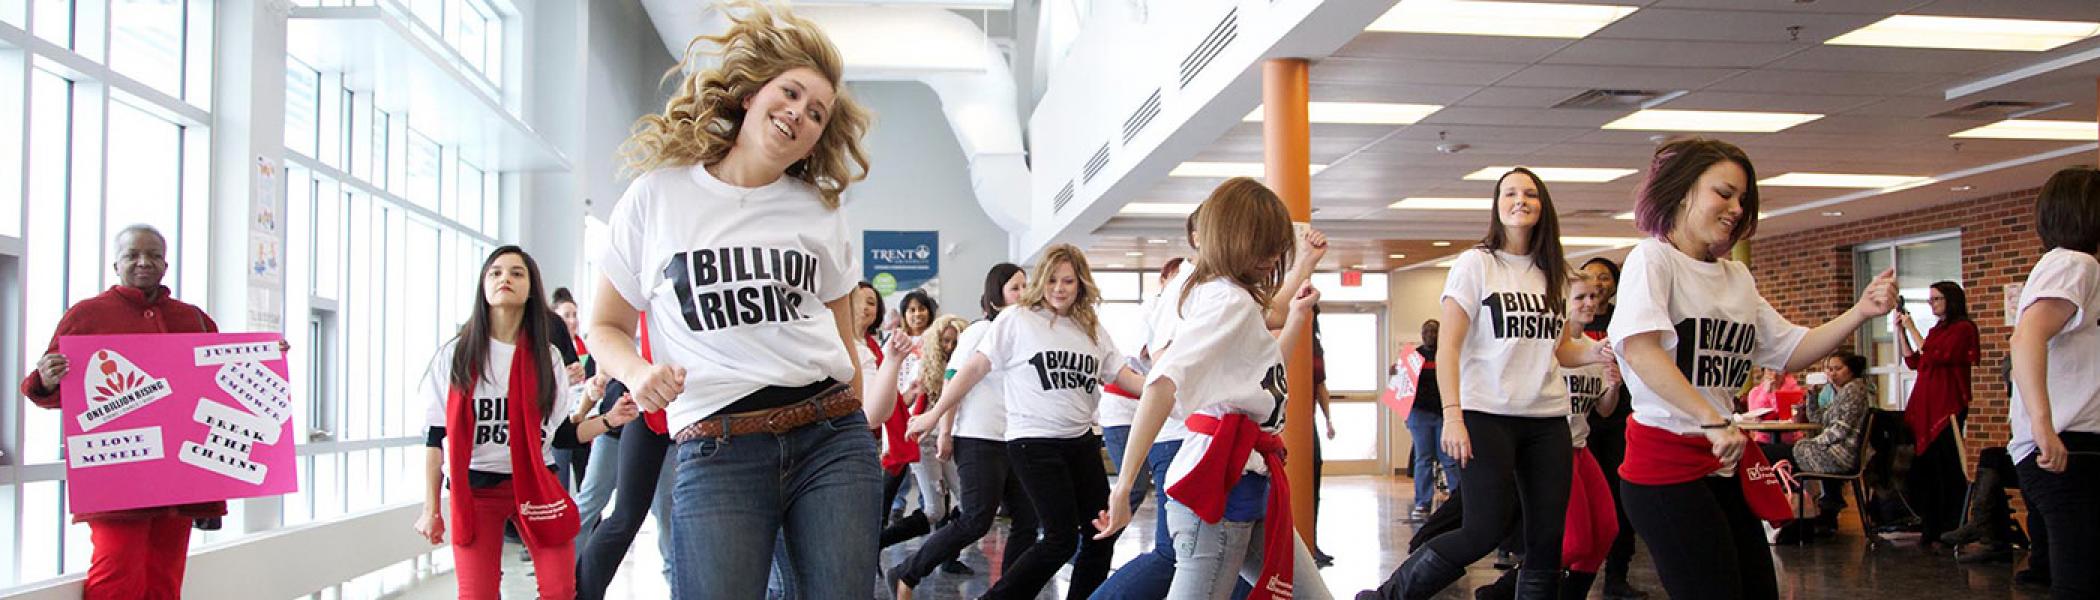 Trent University Durham students doing a flashmob in the Durham campus 